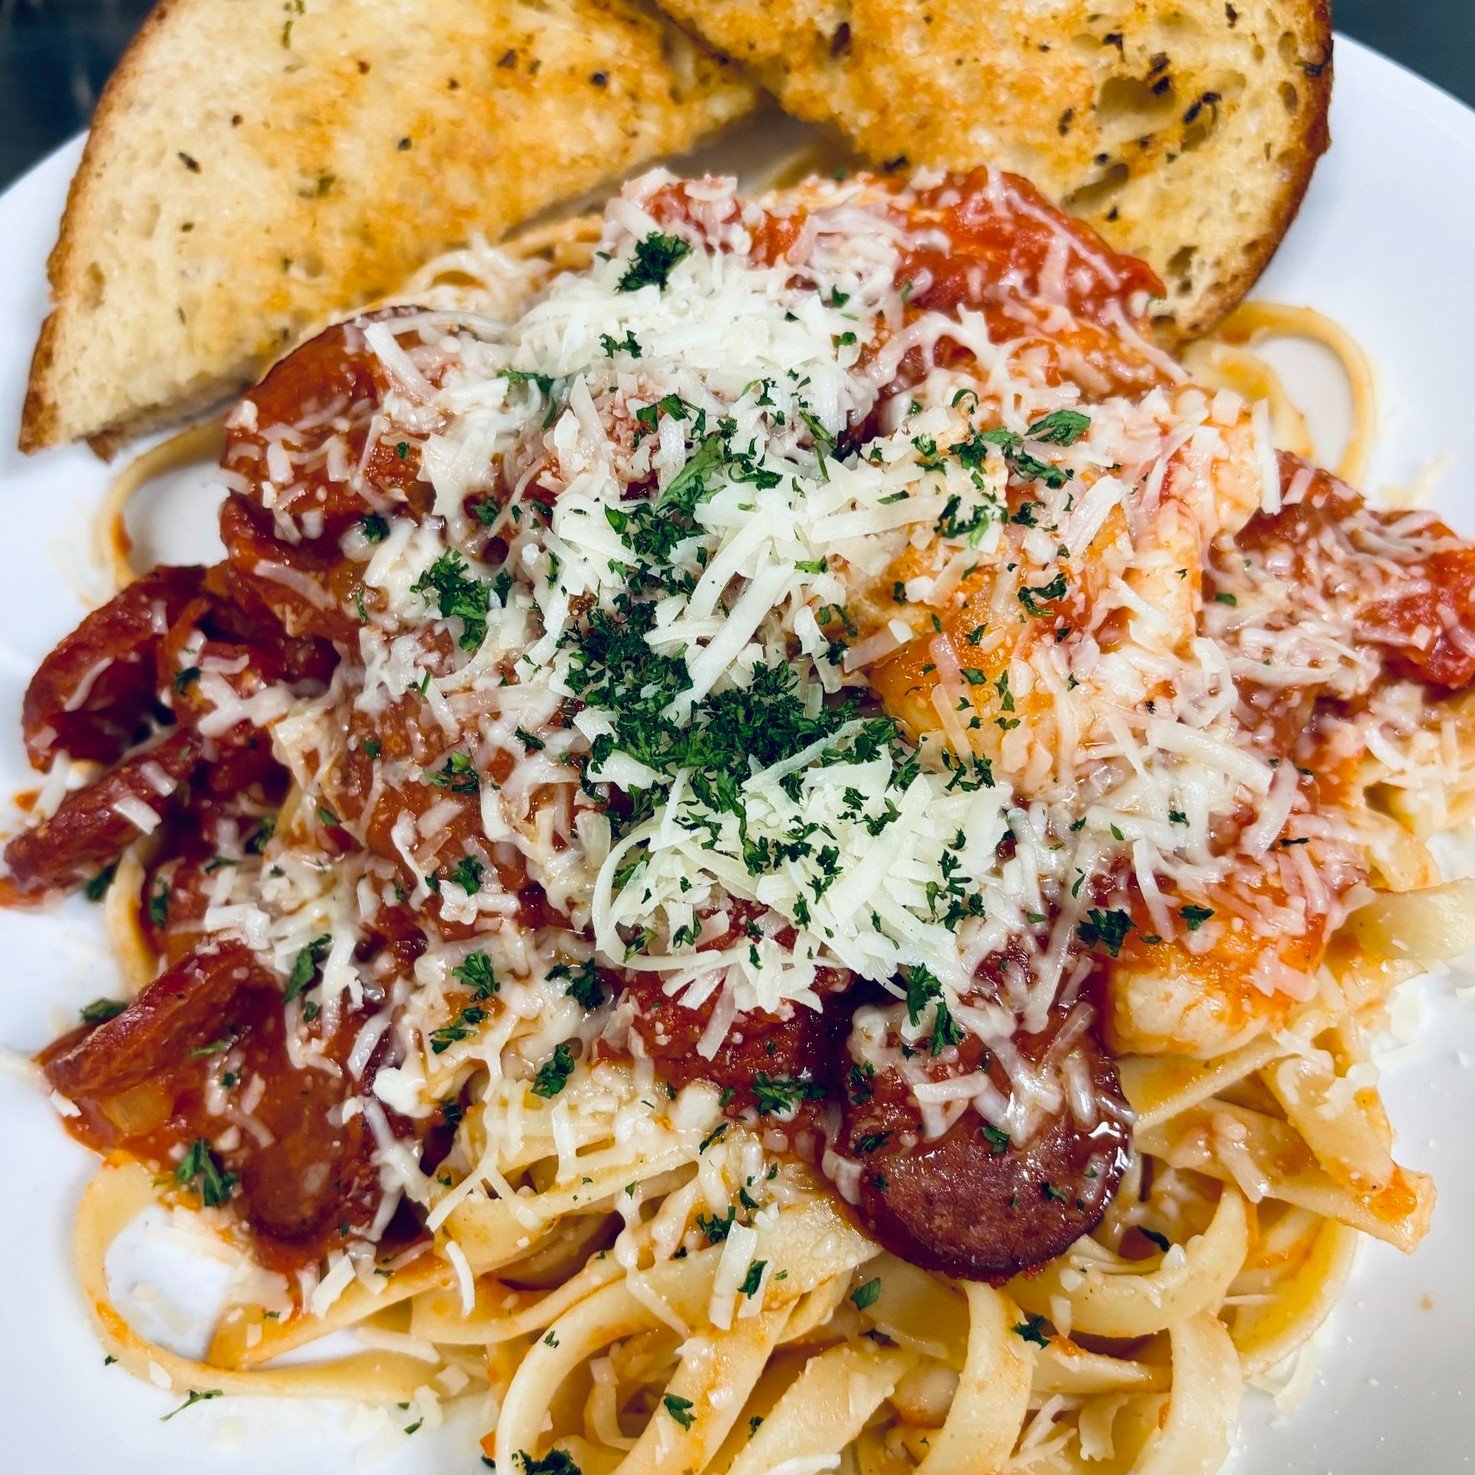 TC's Pub has recently updated our menu to include some NEW items like our chorizo, chicken &amp; prawn fettuccine, tossed in a tomato sauce. We've also added our chicken crunch wrap &mdash;  chicken, cheese, lettuce, tomato &amp; chipotle mayo, wrapp